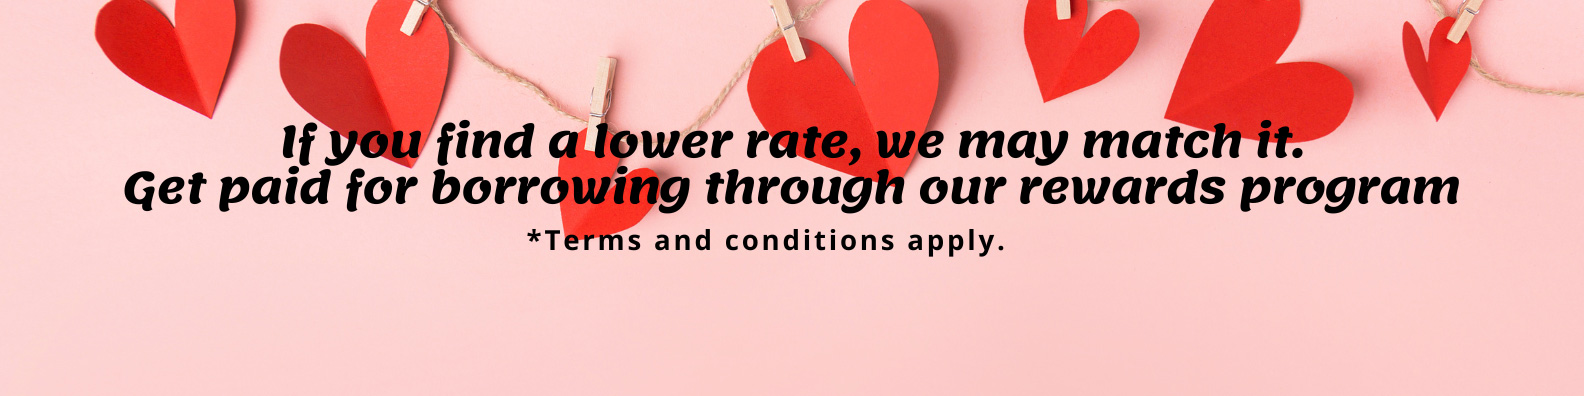 if you find a lower rate, we may match it. Get paid for borrowing through our rewards program.